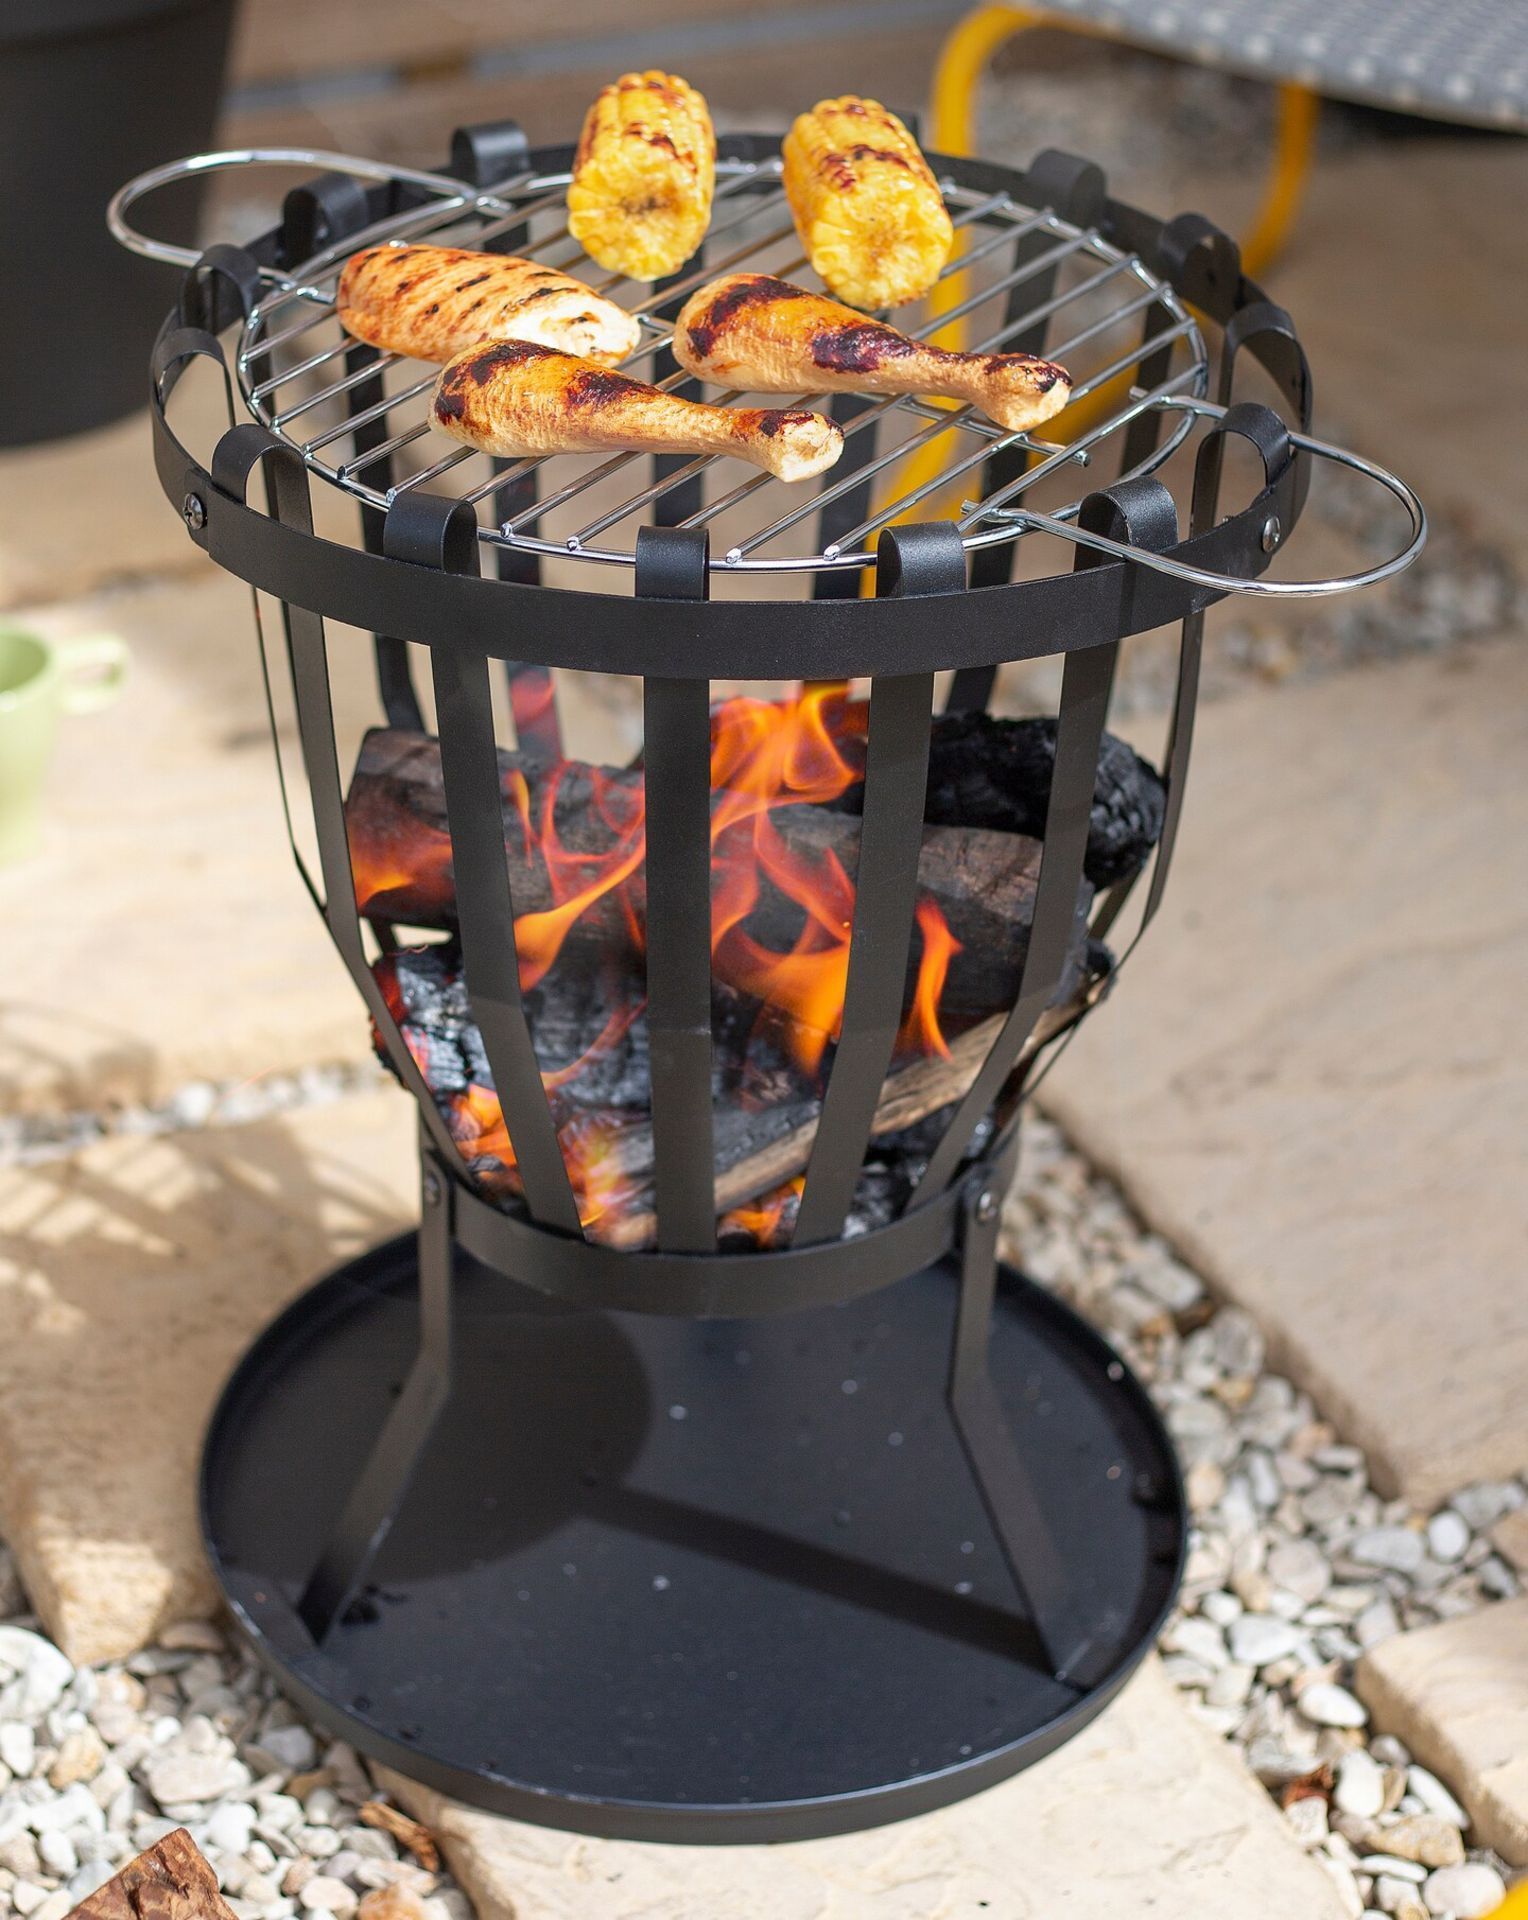 NEW & BOXED LA HACIENDA Curitiba Fire Basket with Cooking Grill. RRP £55 EACH. The simple